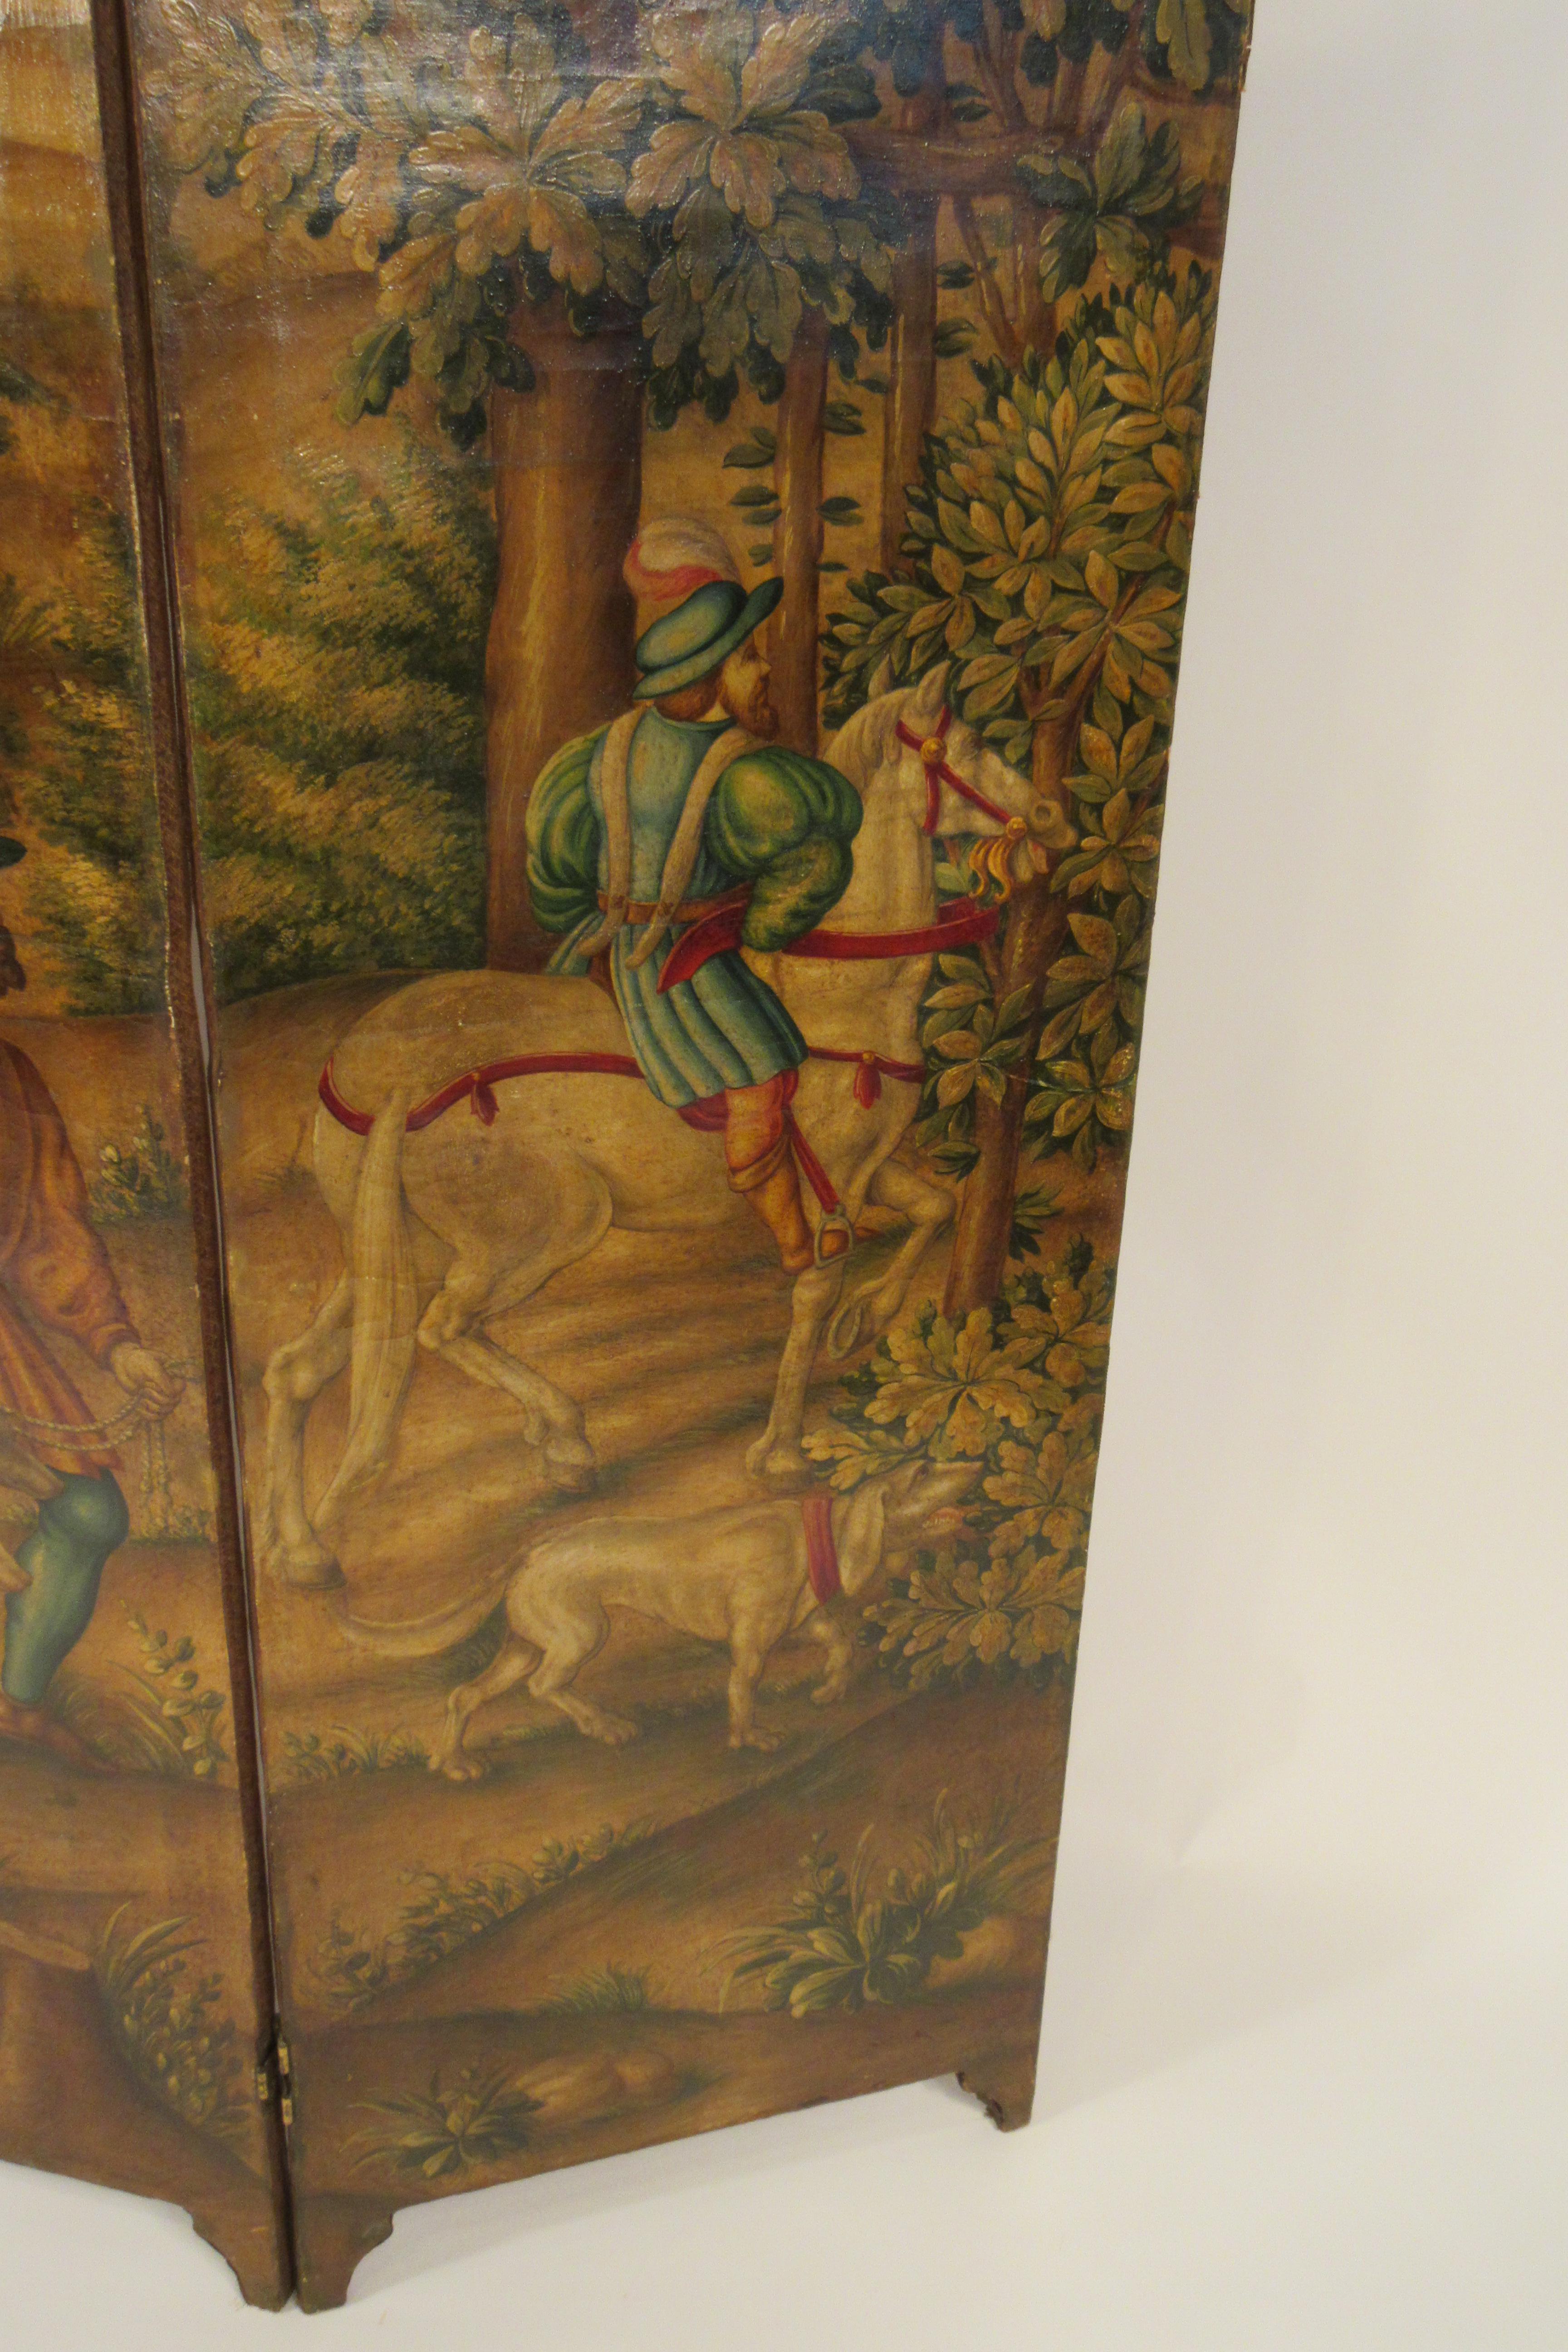 1870s Italian Painted Screen of Hunters on Hoses with Dogs 2